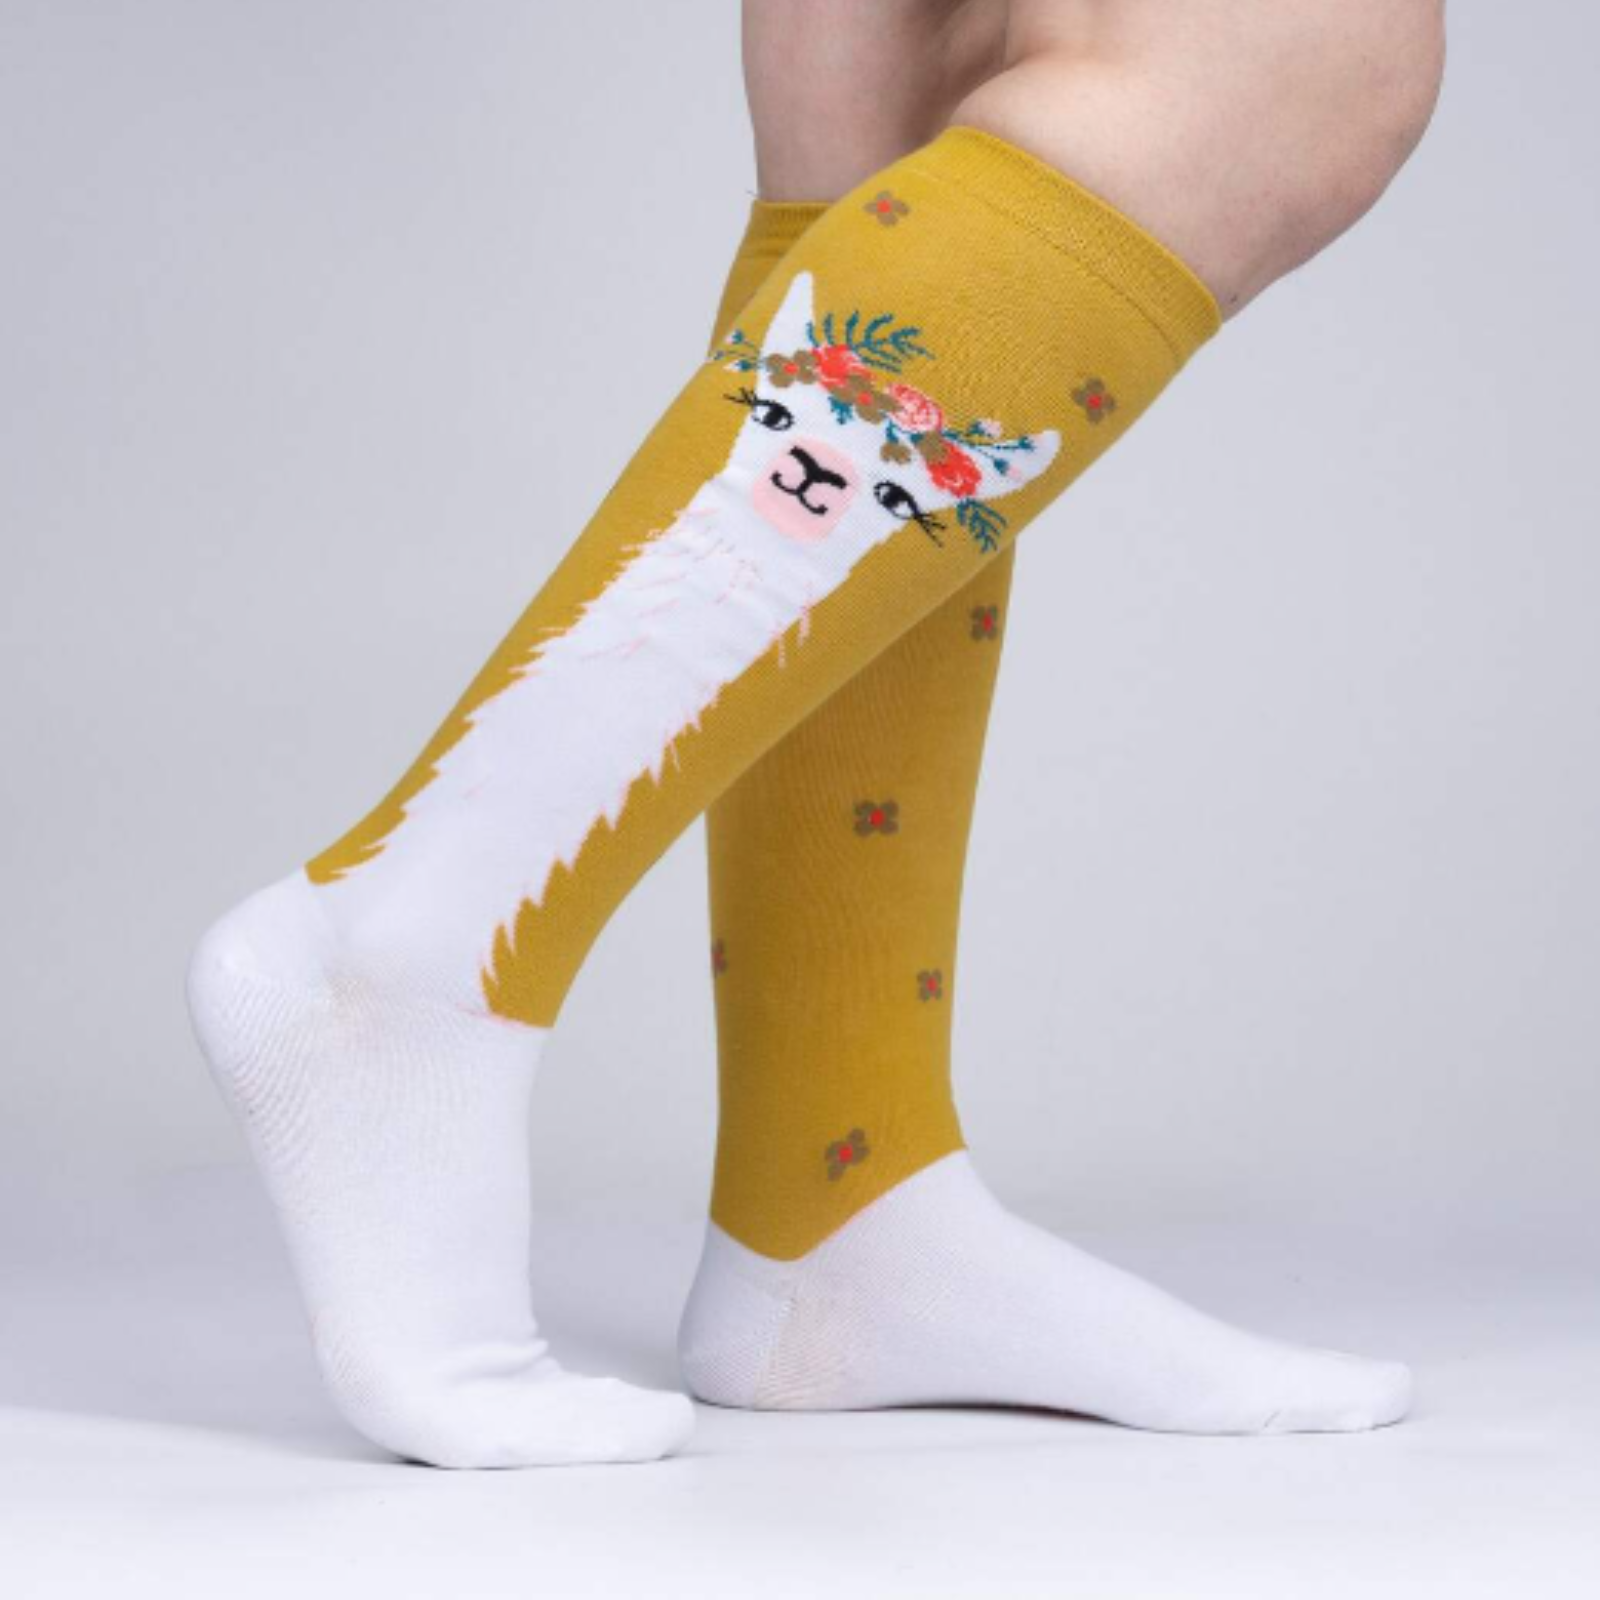 Sock It To Me Llama Queen women's sock featuring goldenrod knee high sock with white llama wearing a floral crown worn by model seen from side.